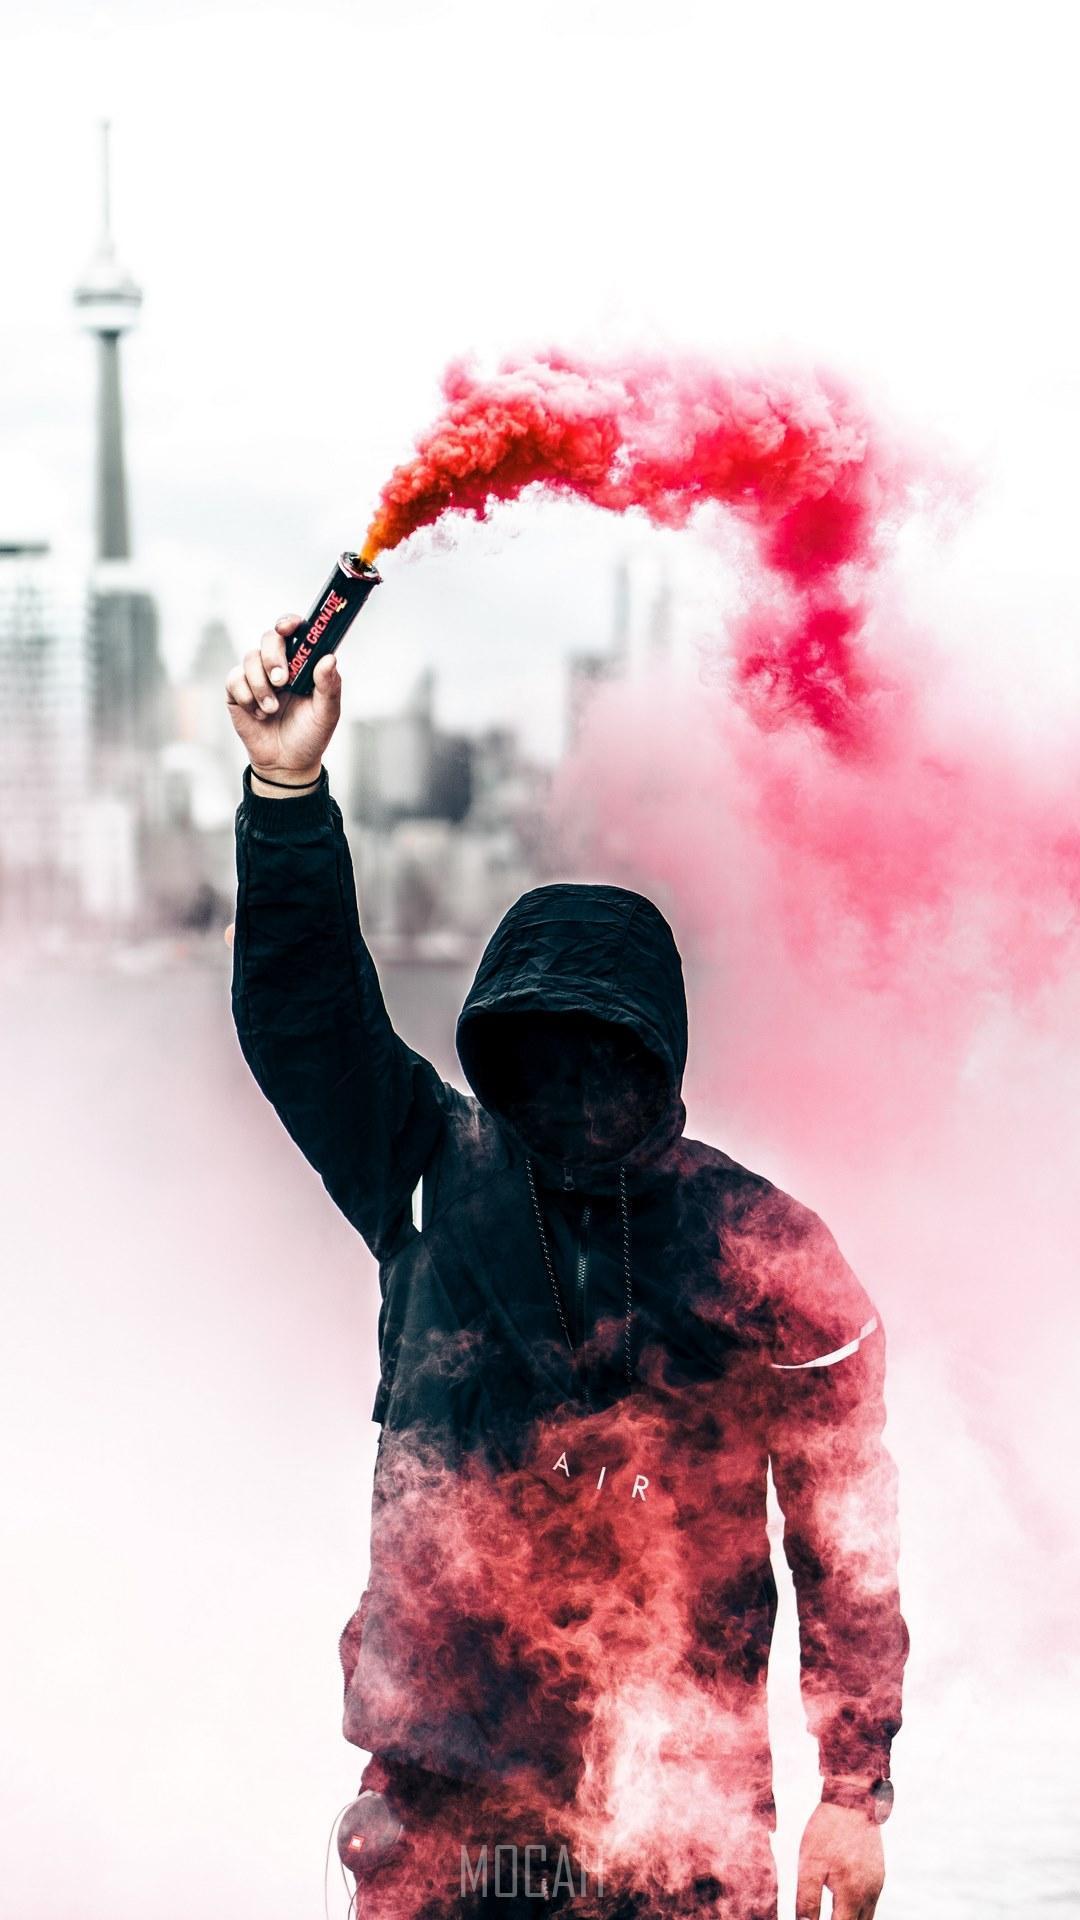 HD wallpaper, A Person In A Black Hoodie With Obscured Face Holds Up A Pink Smoke Grenade, Sony Xperia Xa1 Ultra Wallpaper Download, 1080X1920, Person With Pink Smoke Grenade